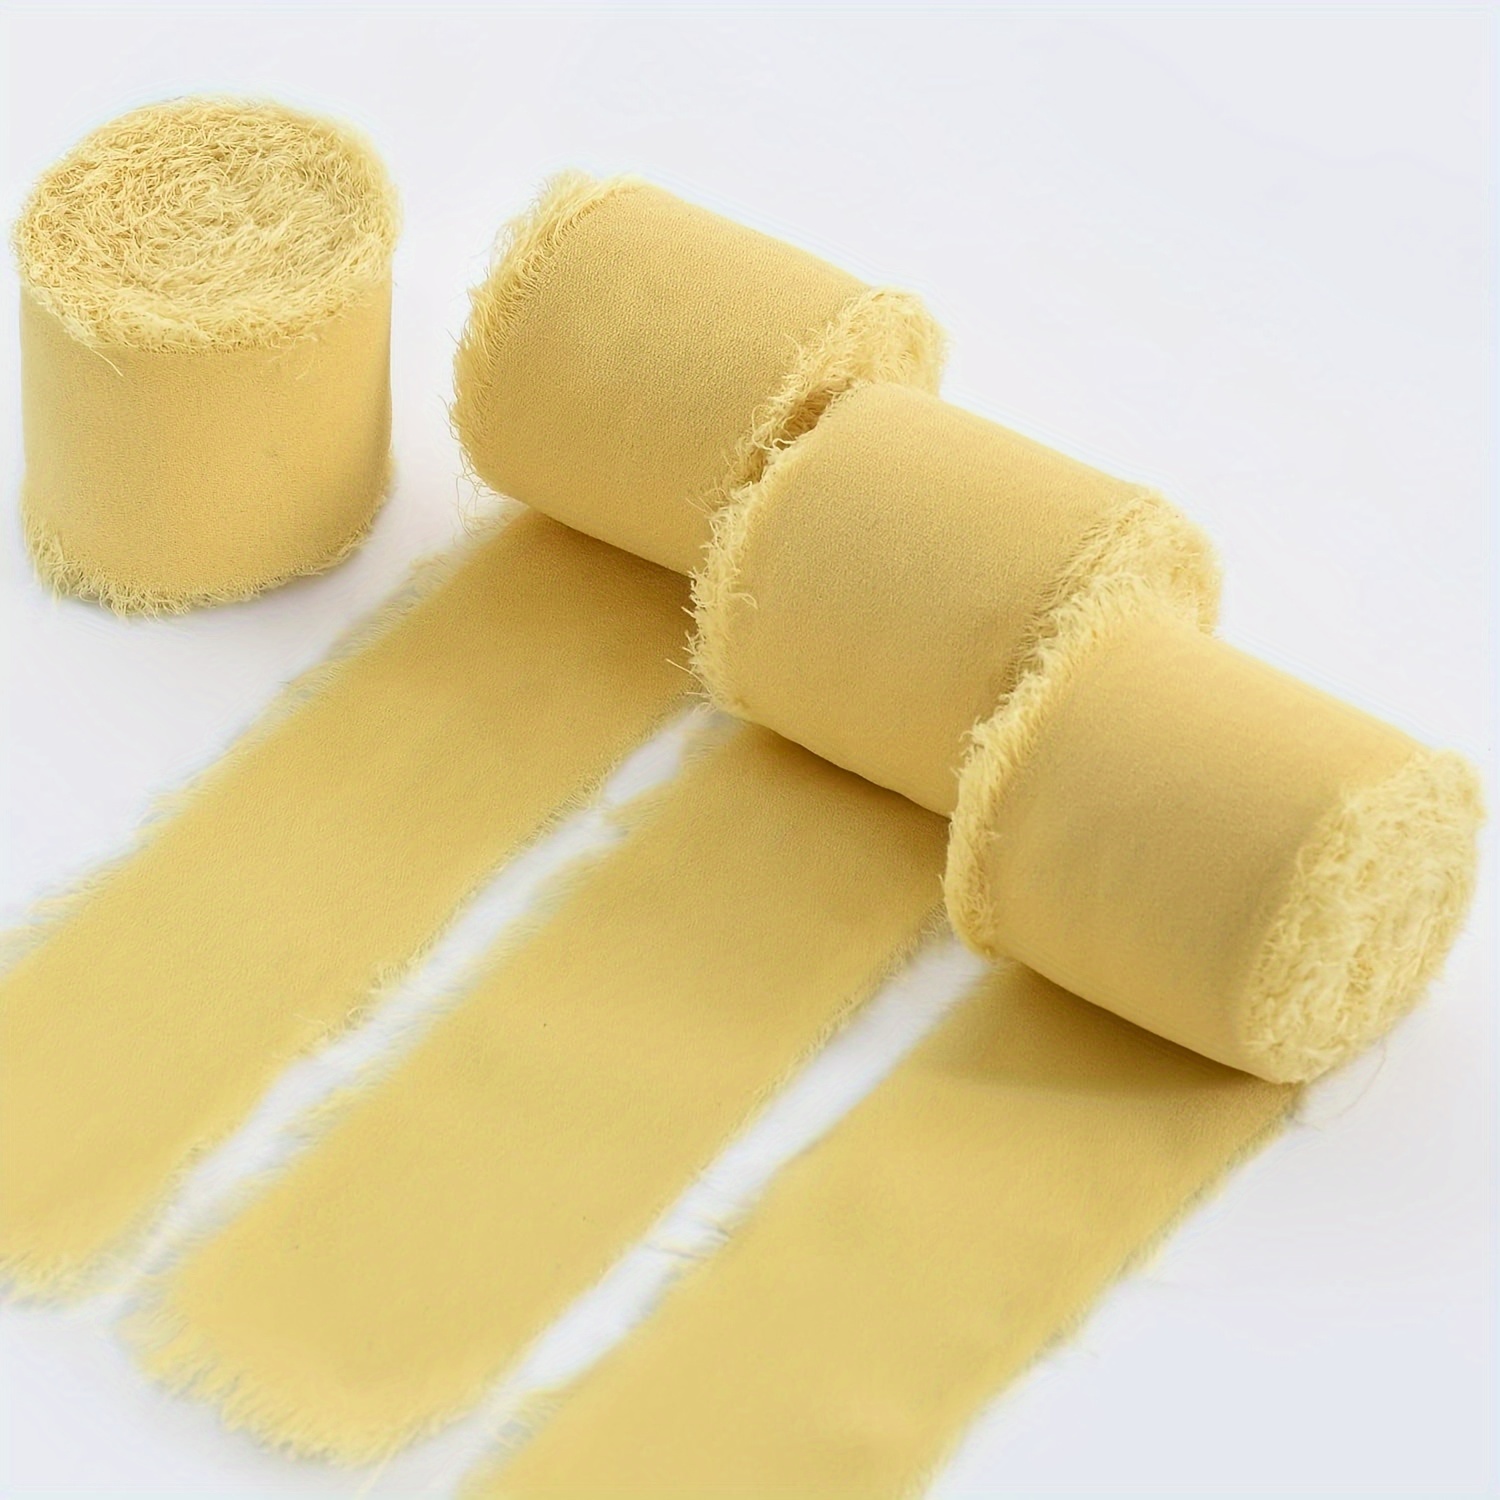 

Set Of 3 Yellow Chiffon Satin Ribbons - 1-1/2" X 22 Yards Each, Frayed Edge Silk Ribbon For Gift Wrapping, Bridal Bouquets, Wedding Invitations, And Craft Decorations